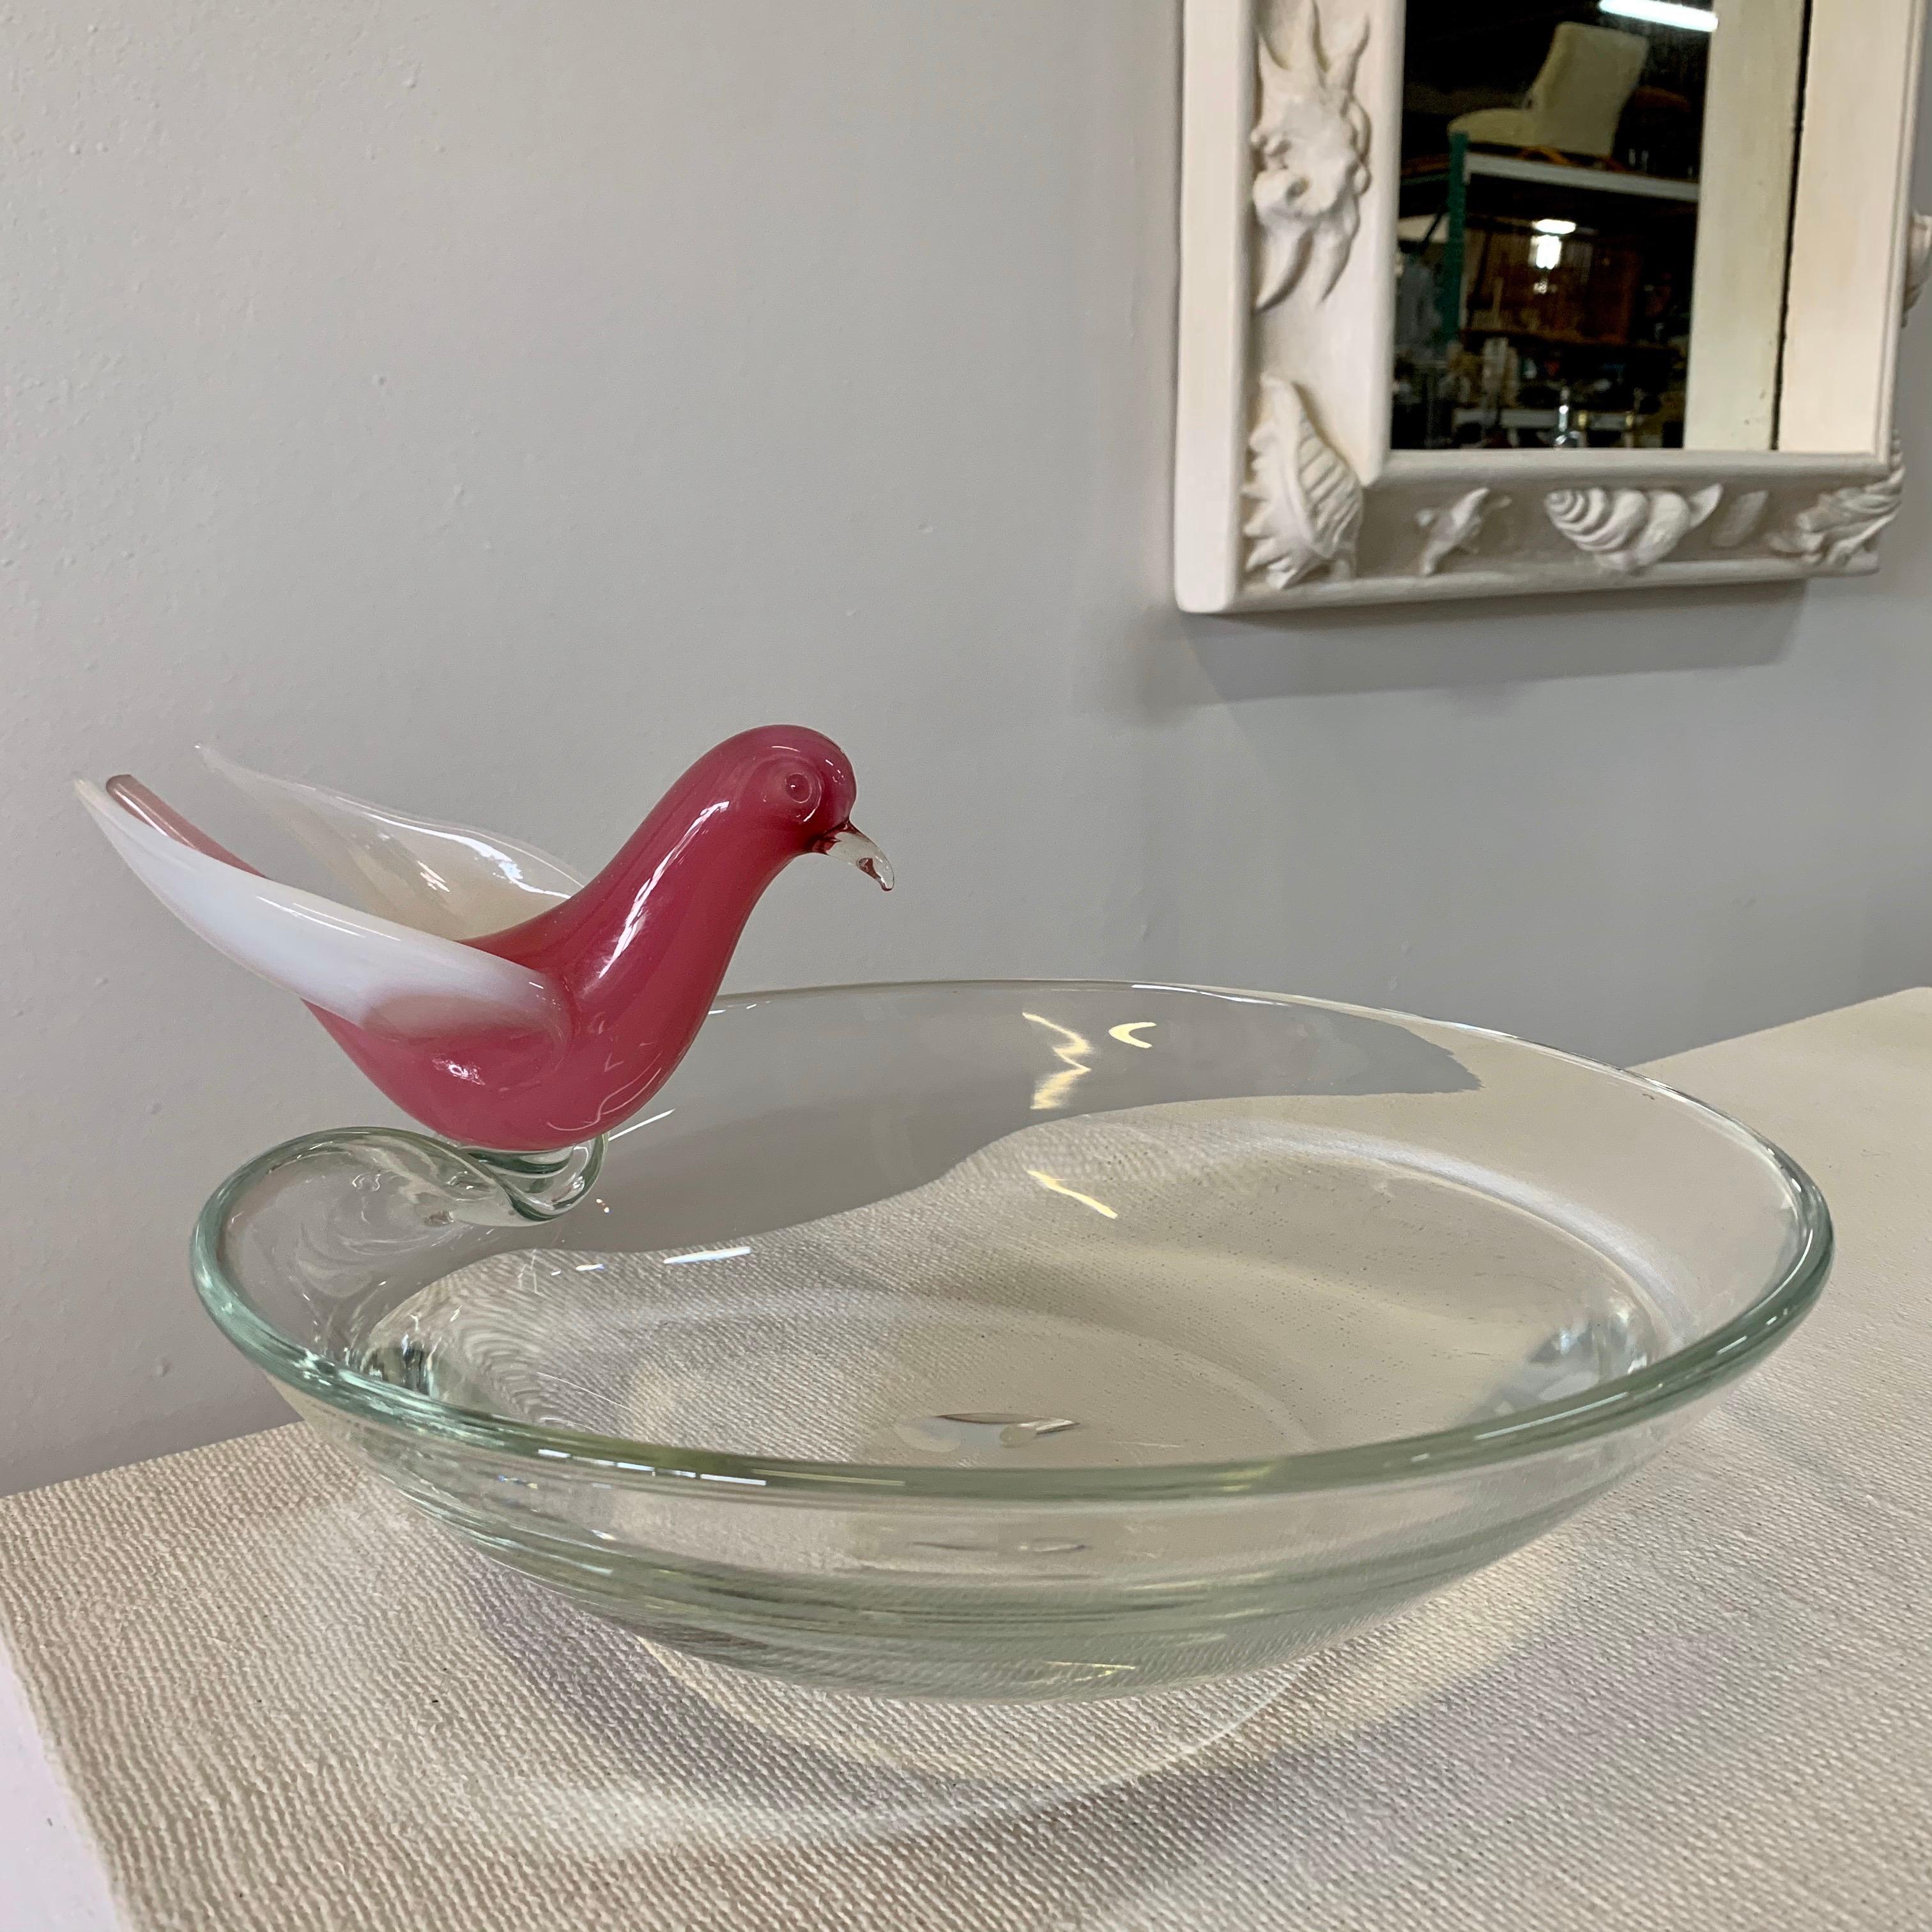 Vintage Barbini Murano Glass Bird Bath Bowl In Excellent Condition For Sale In East Hampton, NY